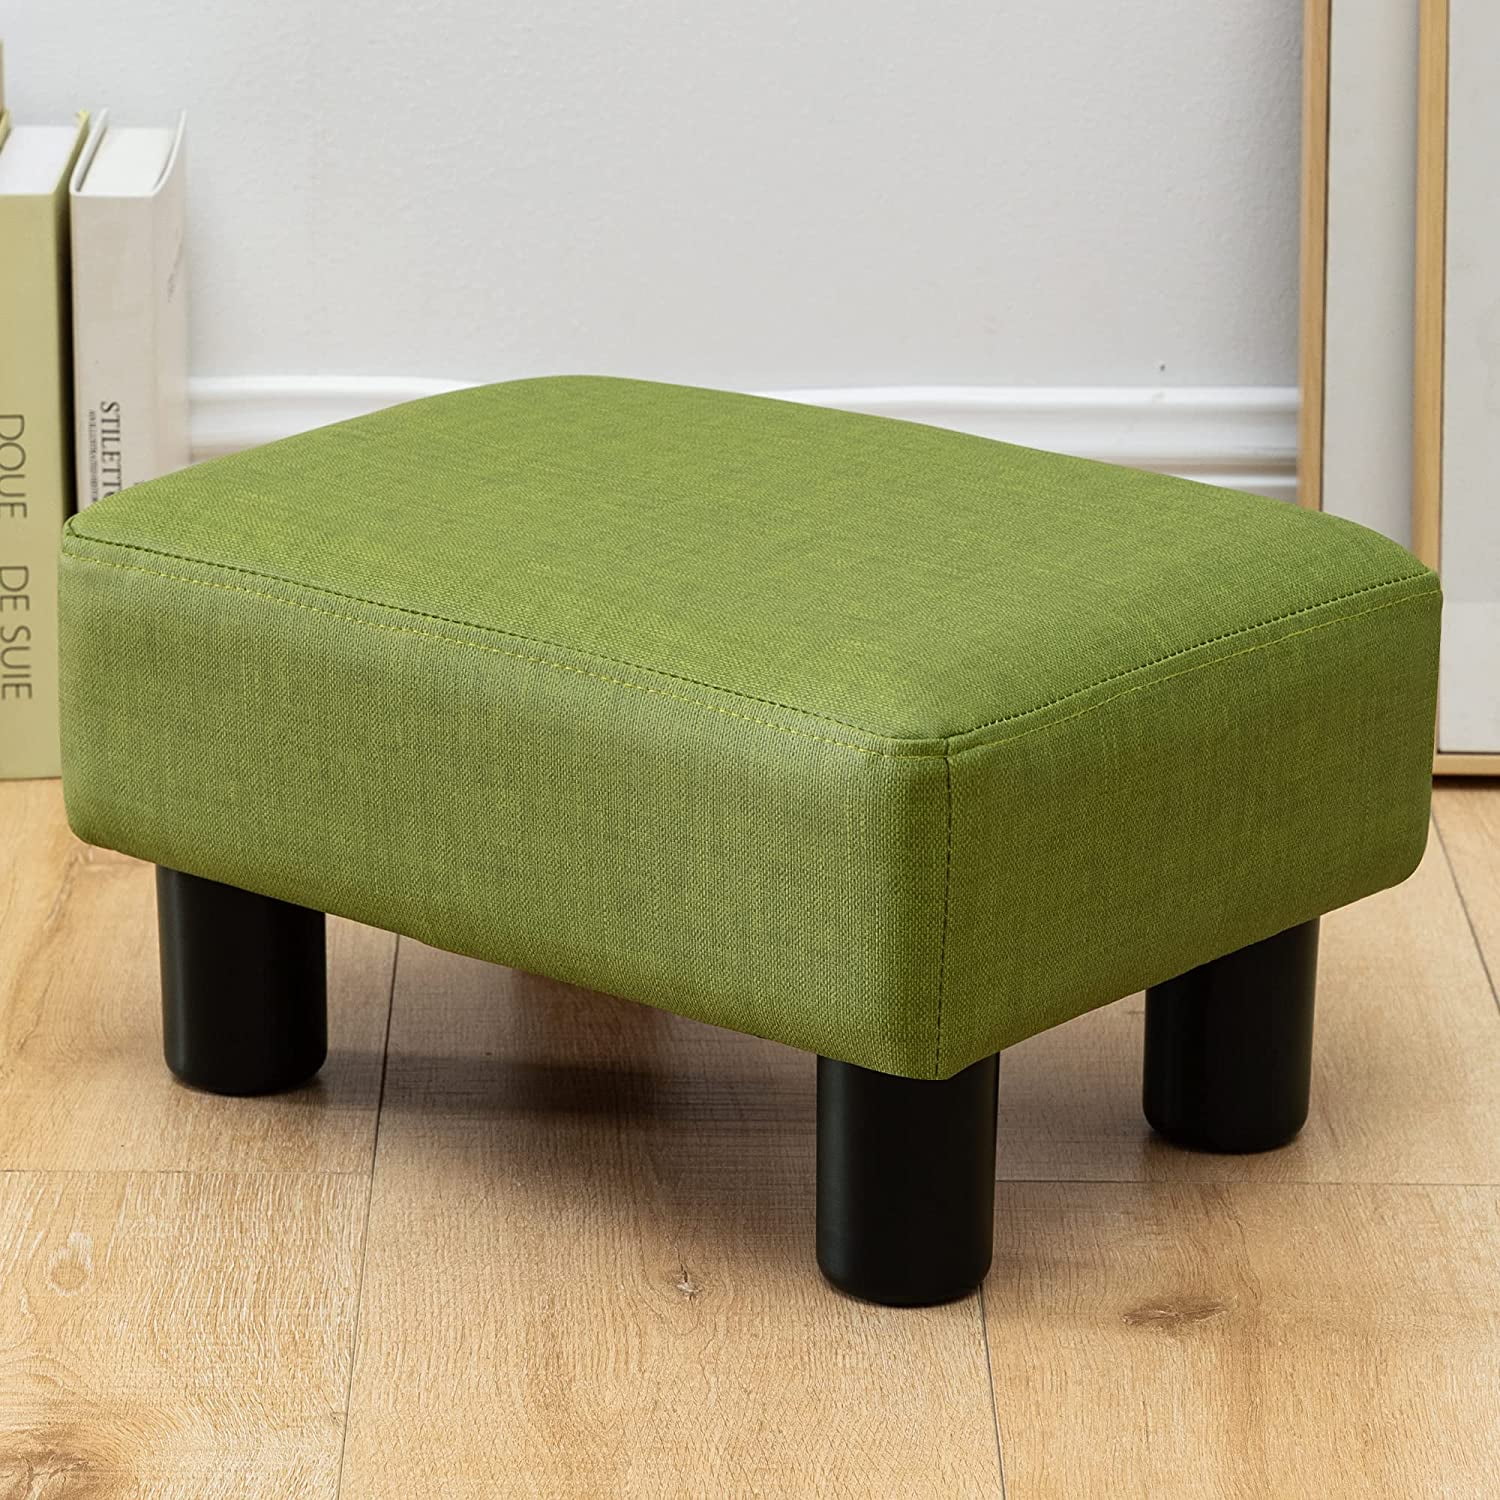 Small foot stool ottoman, PU leather rectangle ottoman footrest, bedside  step stool with wood legs, small Rectangular stool, foot rest for couch